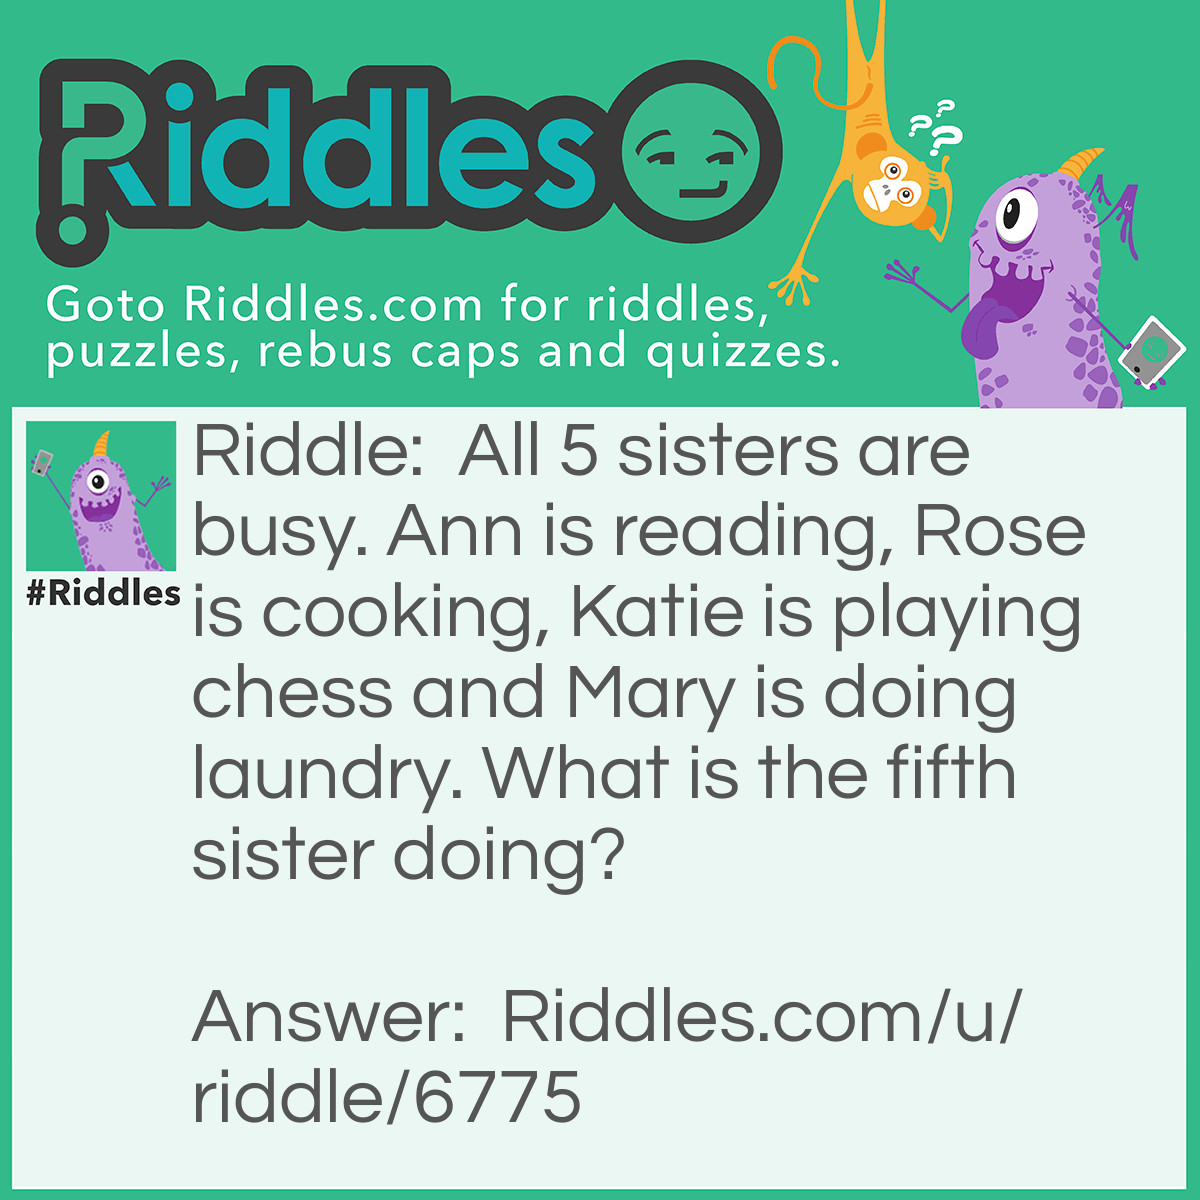 Riddle: All 5 sisters are busy. Ann is reading, Rose is cooking, Katie is playing chess and Mary is doing laundry. What is the fifth sister doing? Answer: She is playing chess with Katie.